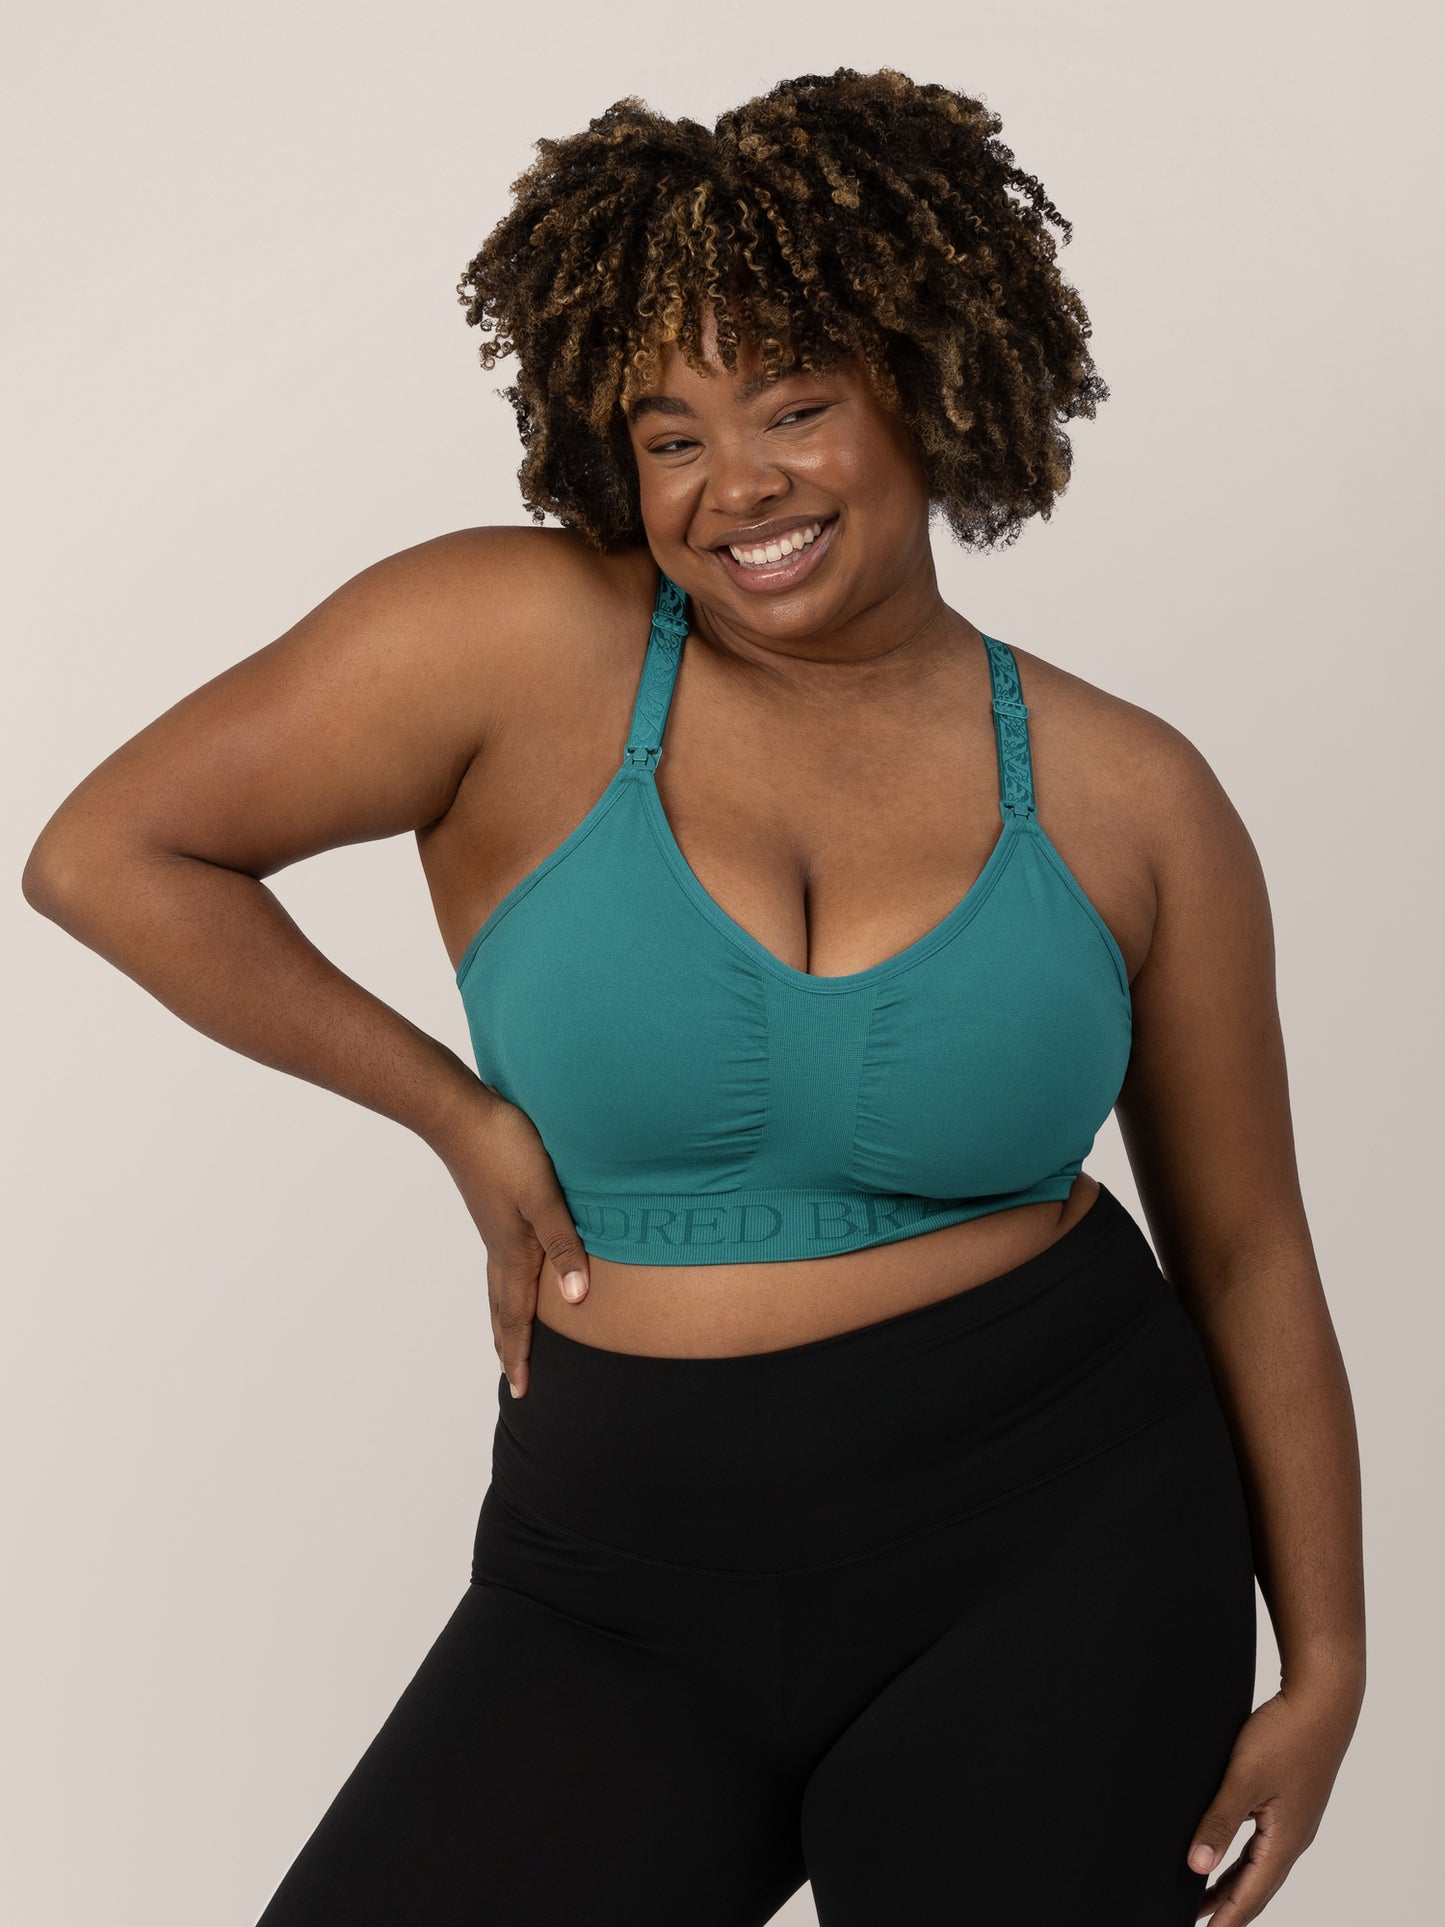 Model with her hand on her hip wearing the Sublime® Hands-Free Pumping & Nursing Sports Bra in Teal and smiling. @model_info:Skye is wearing an X-Large Busty.